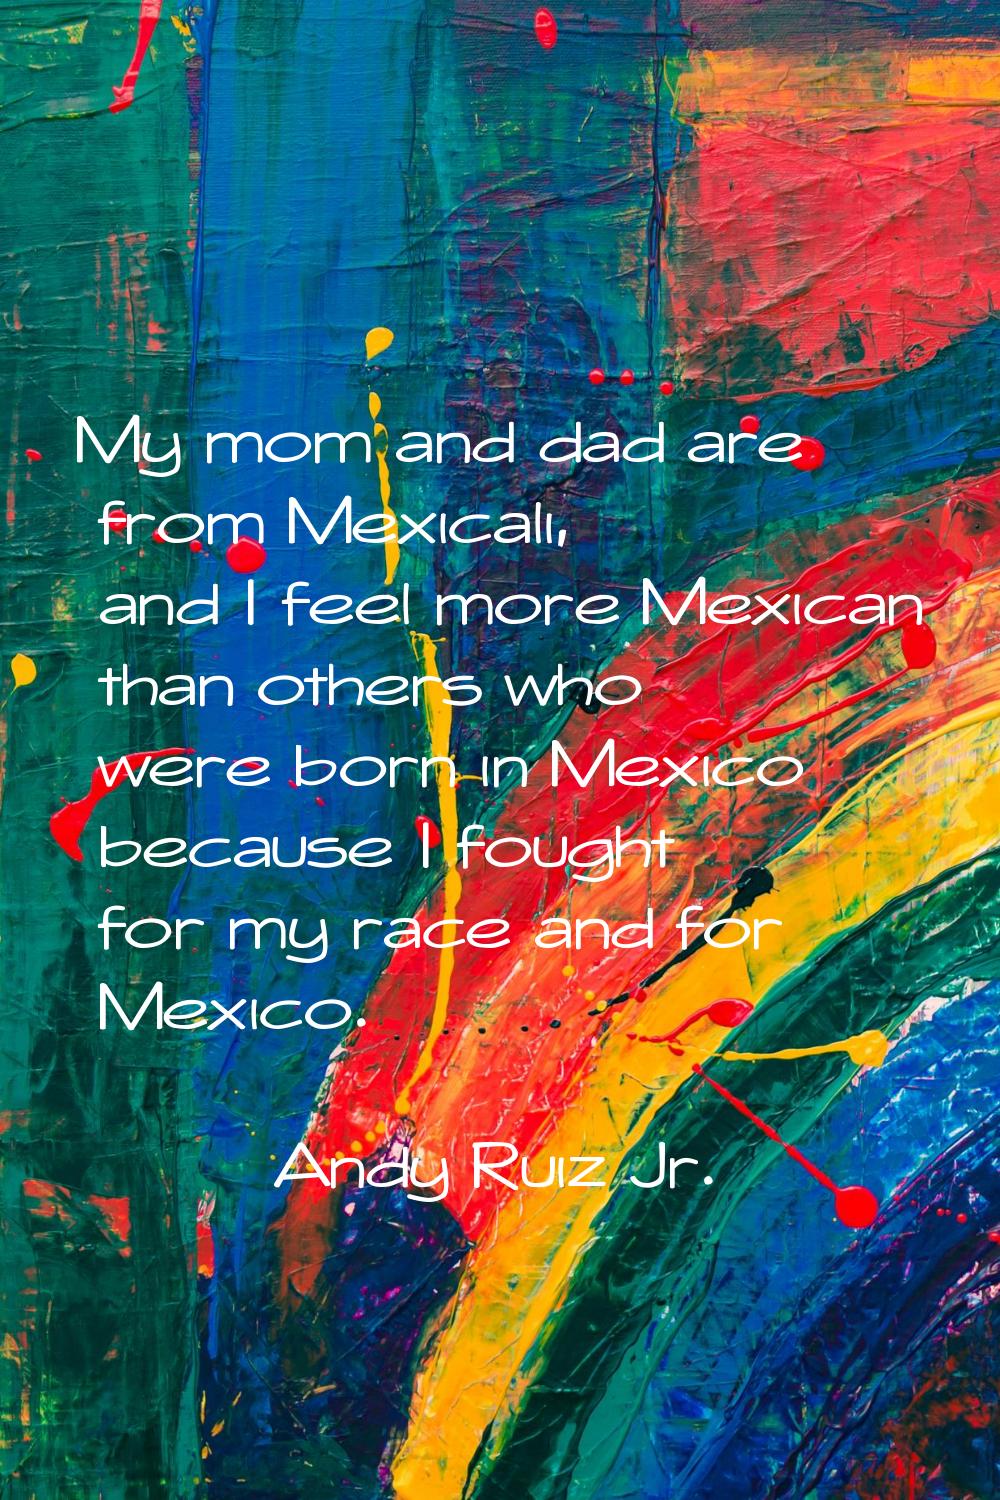 My mom and dad are from Mexicali, and I feel more Mexican than others who were born in Mexico becau